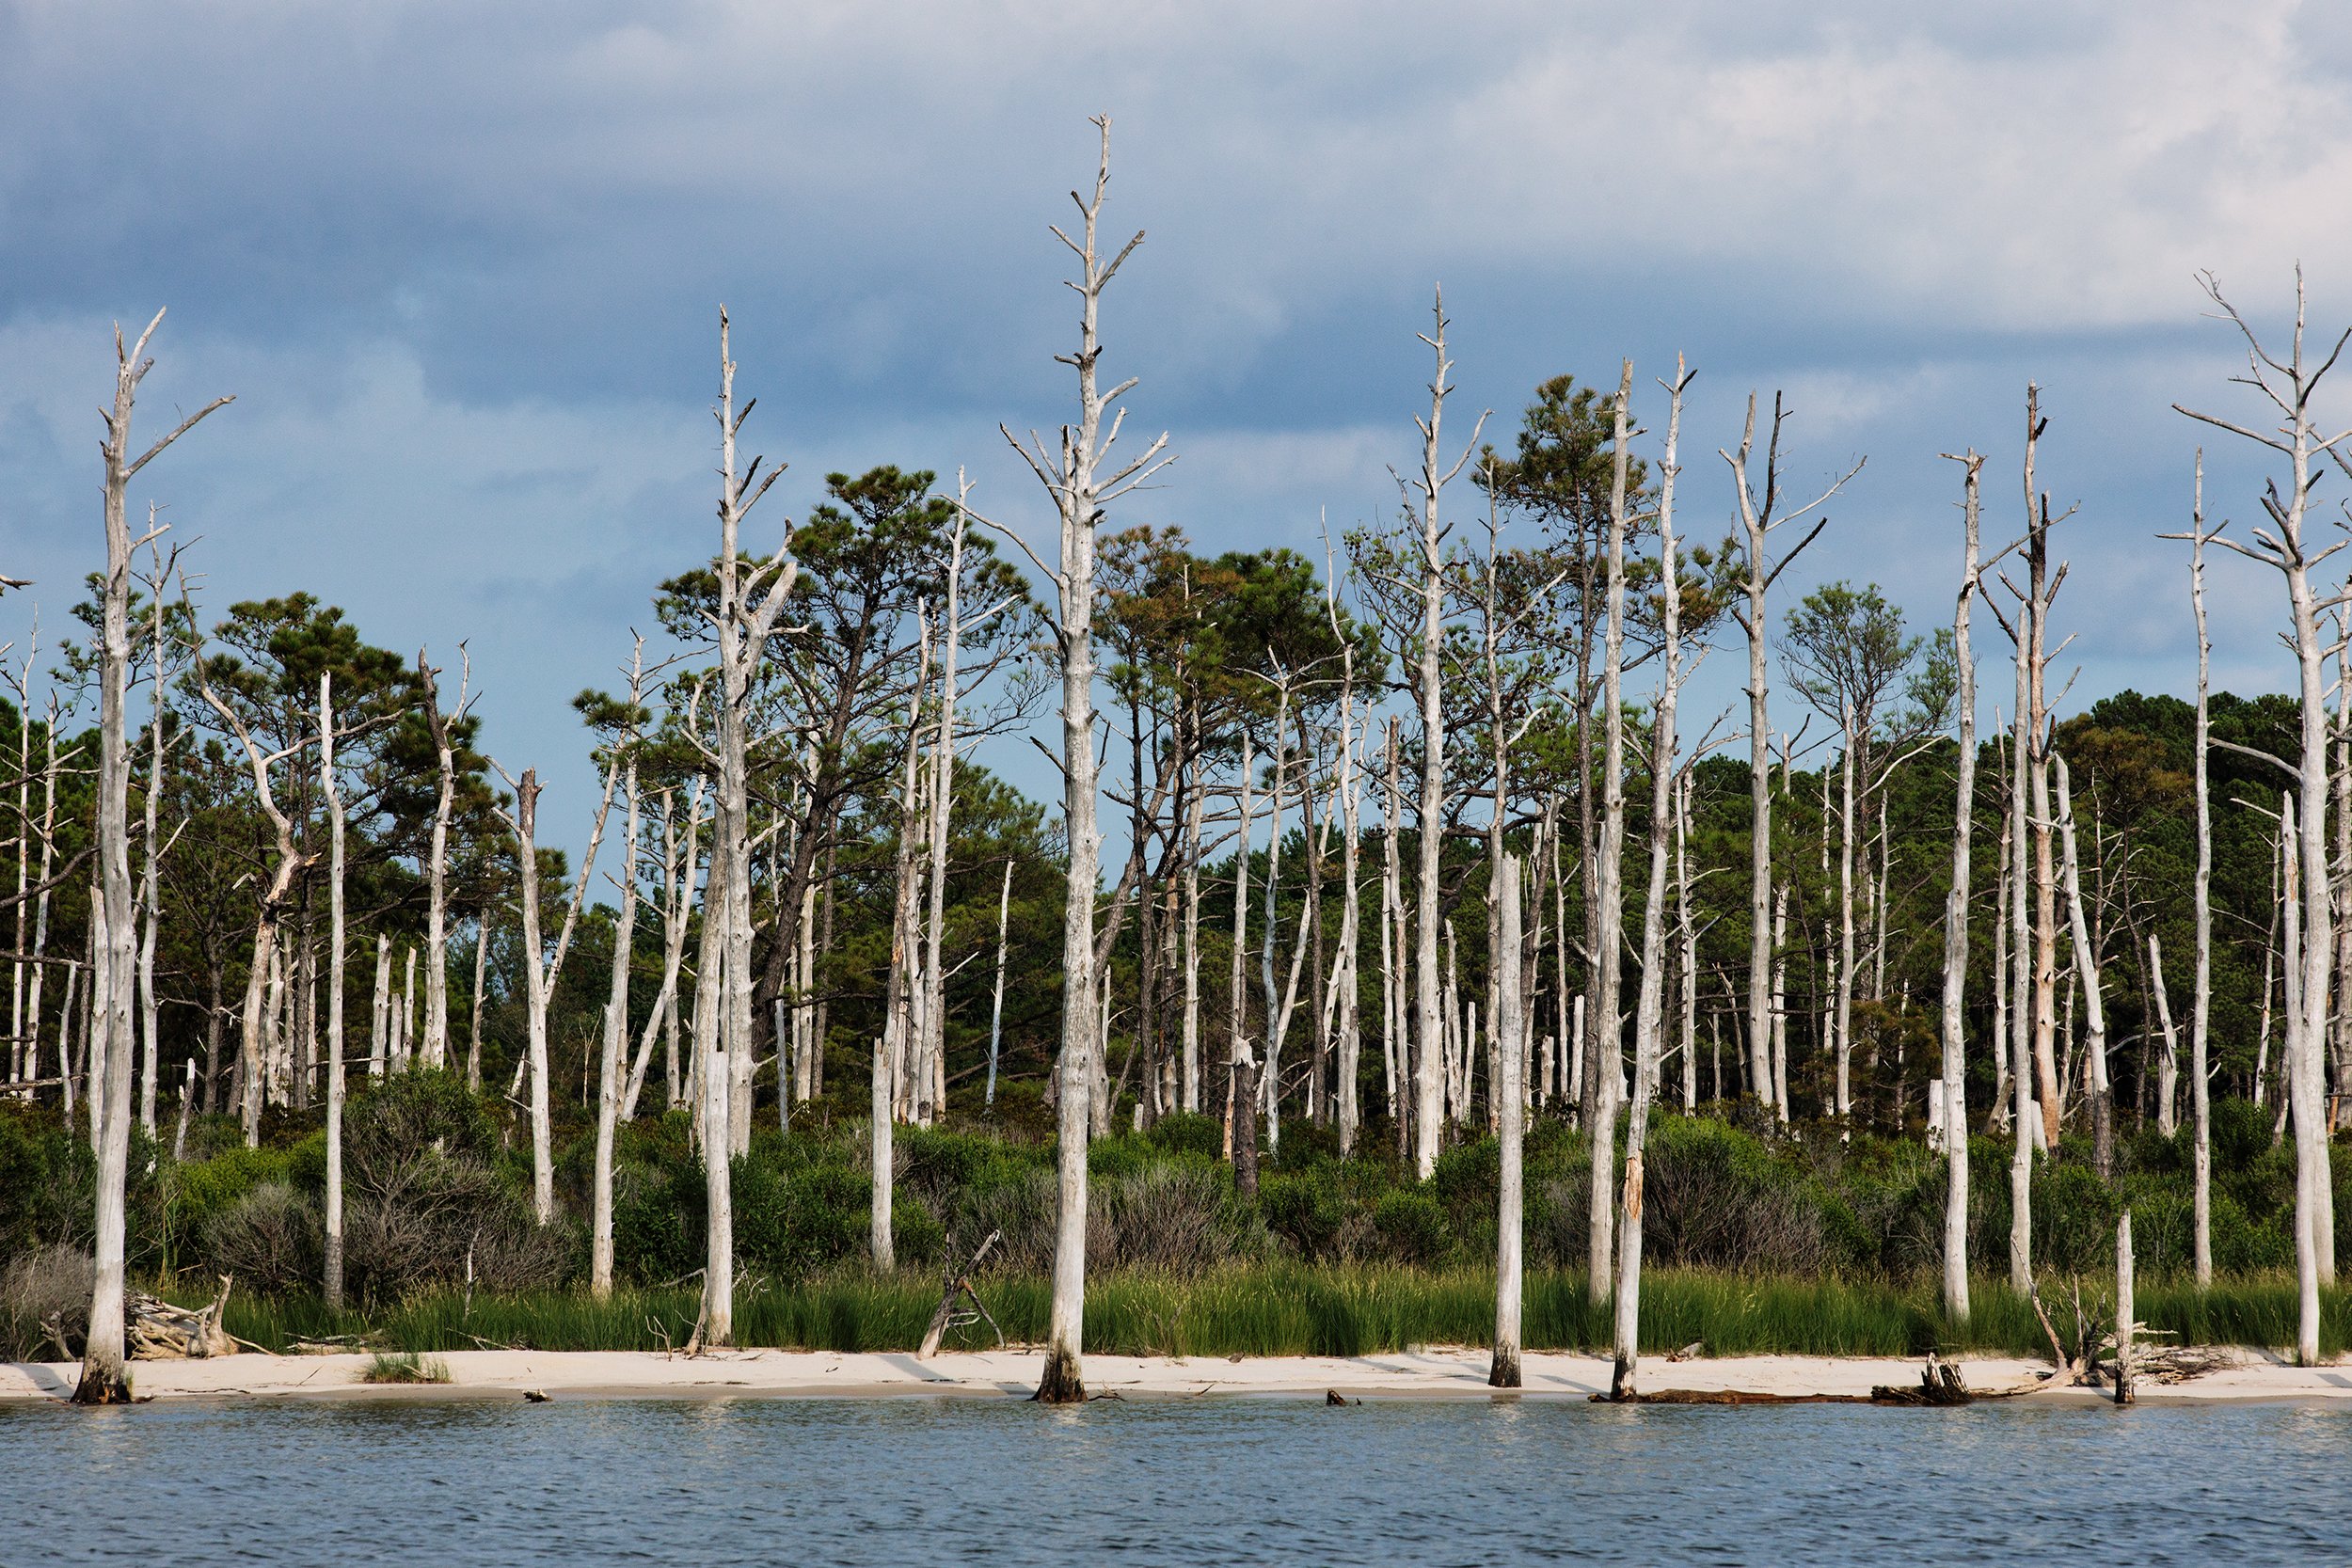  A ghost forest of loblolly pines on Deal Island is the result of sea level rise and shoreline erosion. As the brackish water encroaches further into the root systems on land, it kills off the trees that cannot handle the salt content. 